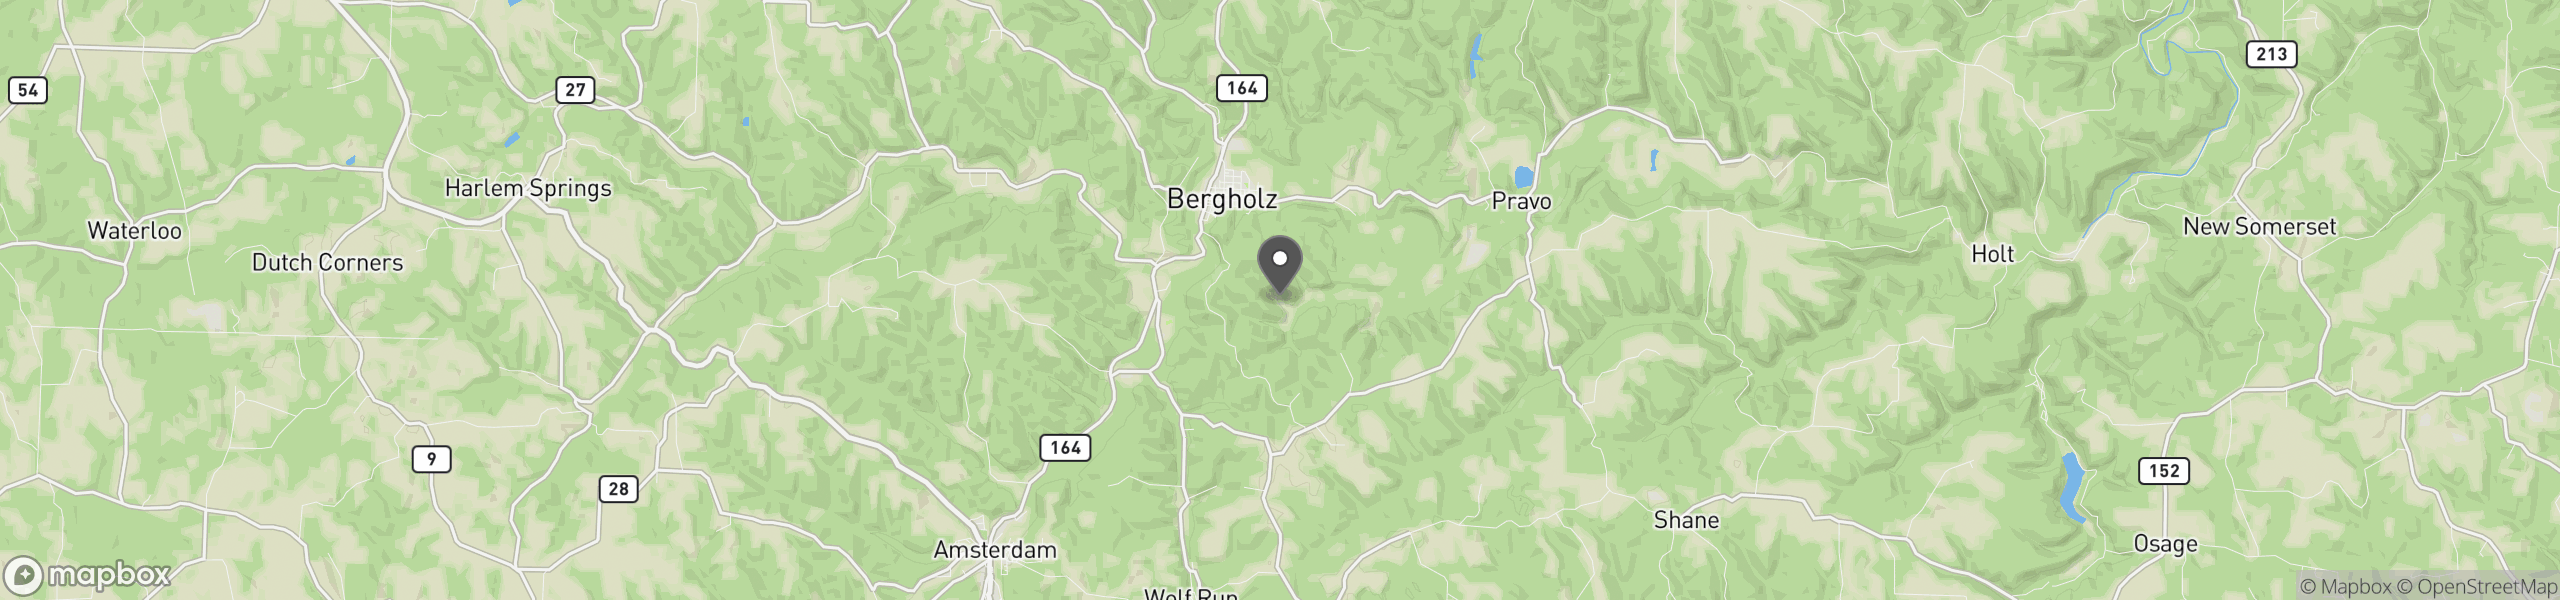 Bergholz, OH 43908